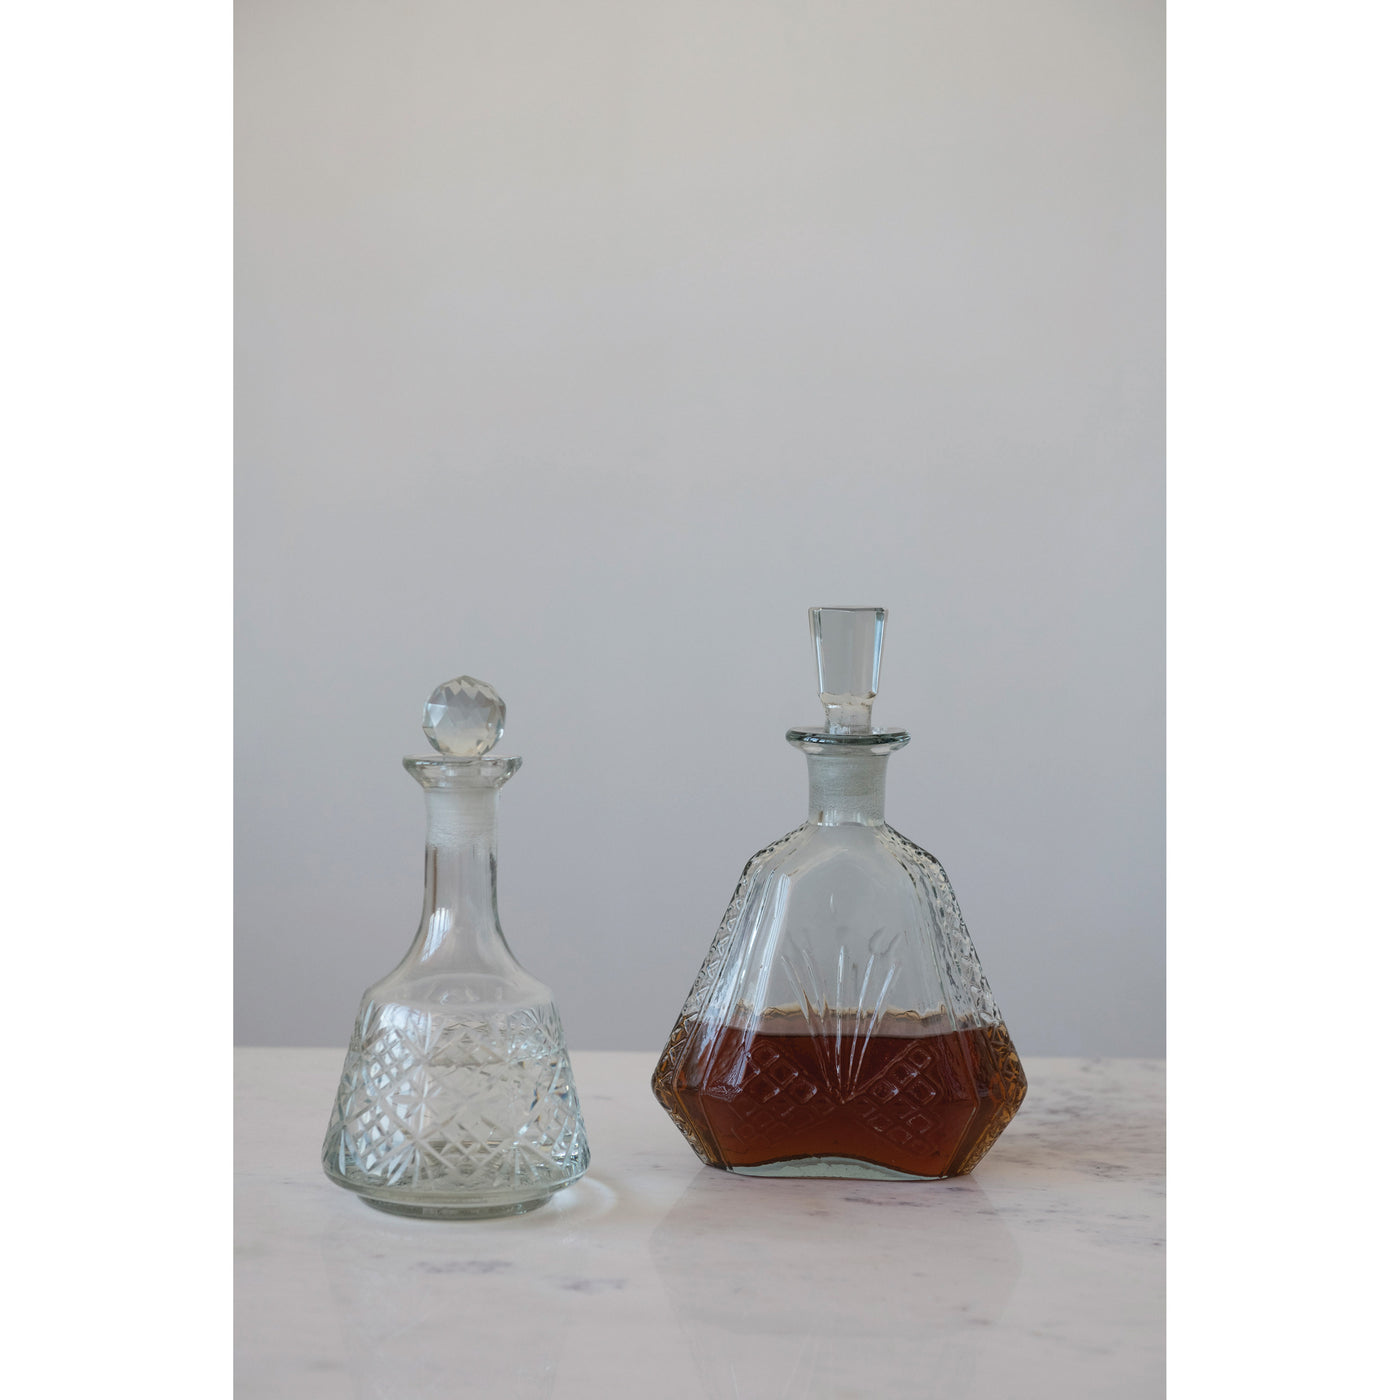 20 oz. Etched Glass Decanter